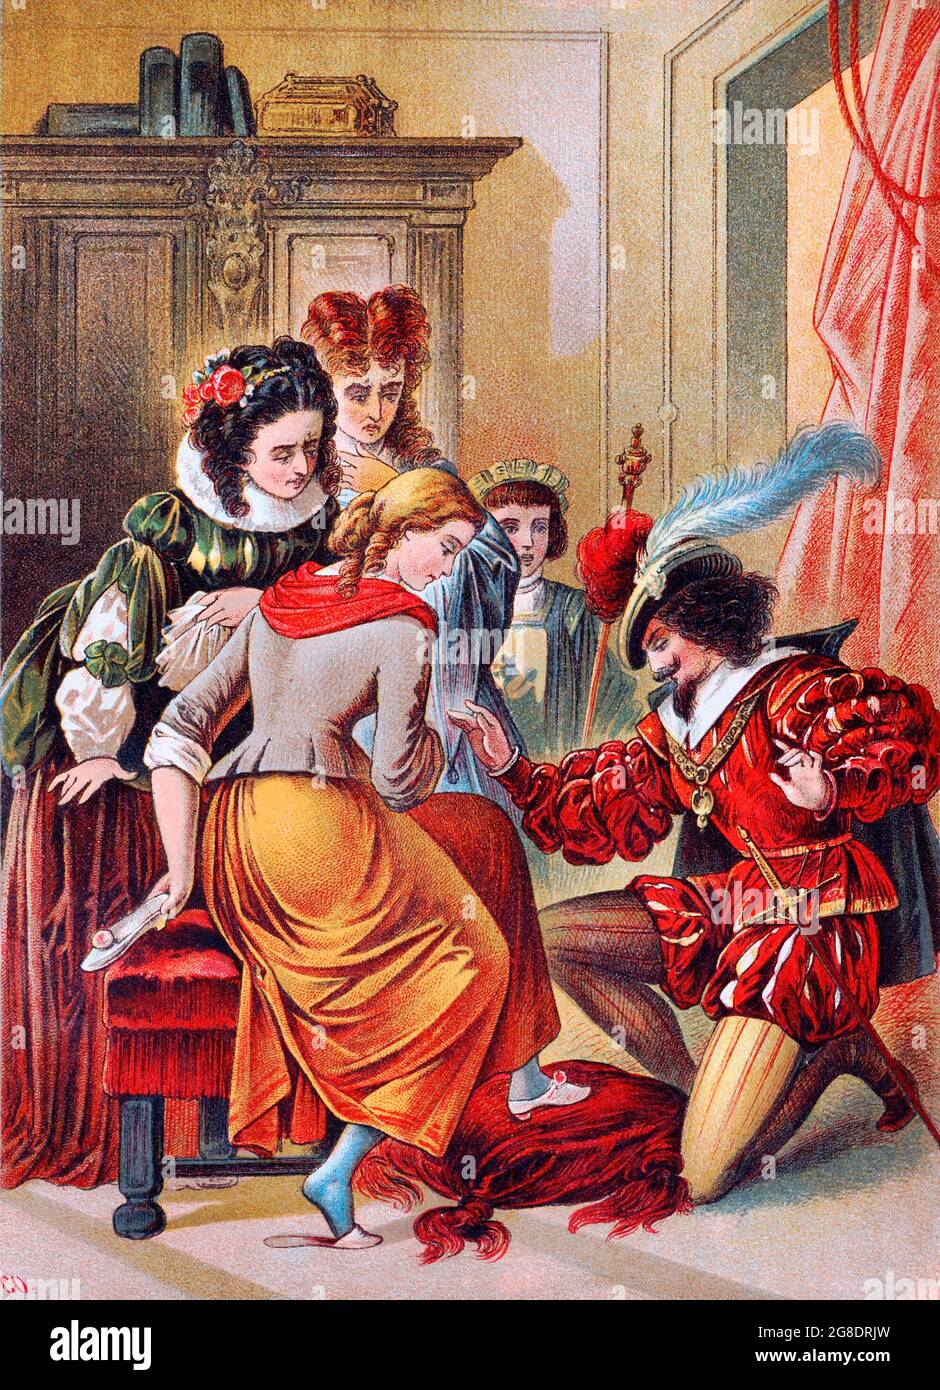 Cinderella tries on the glass slipper, illustration by Carl Offterdinger Stock Photo